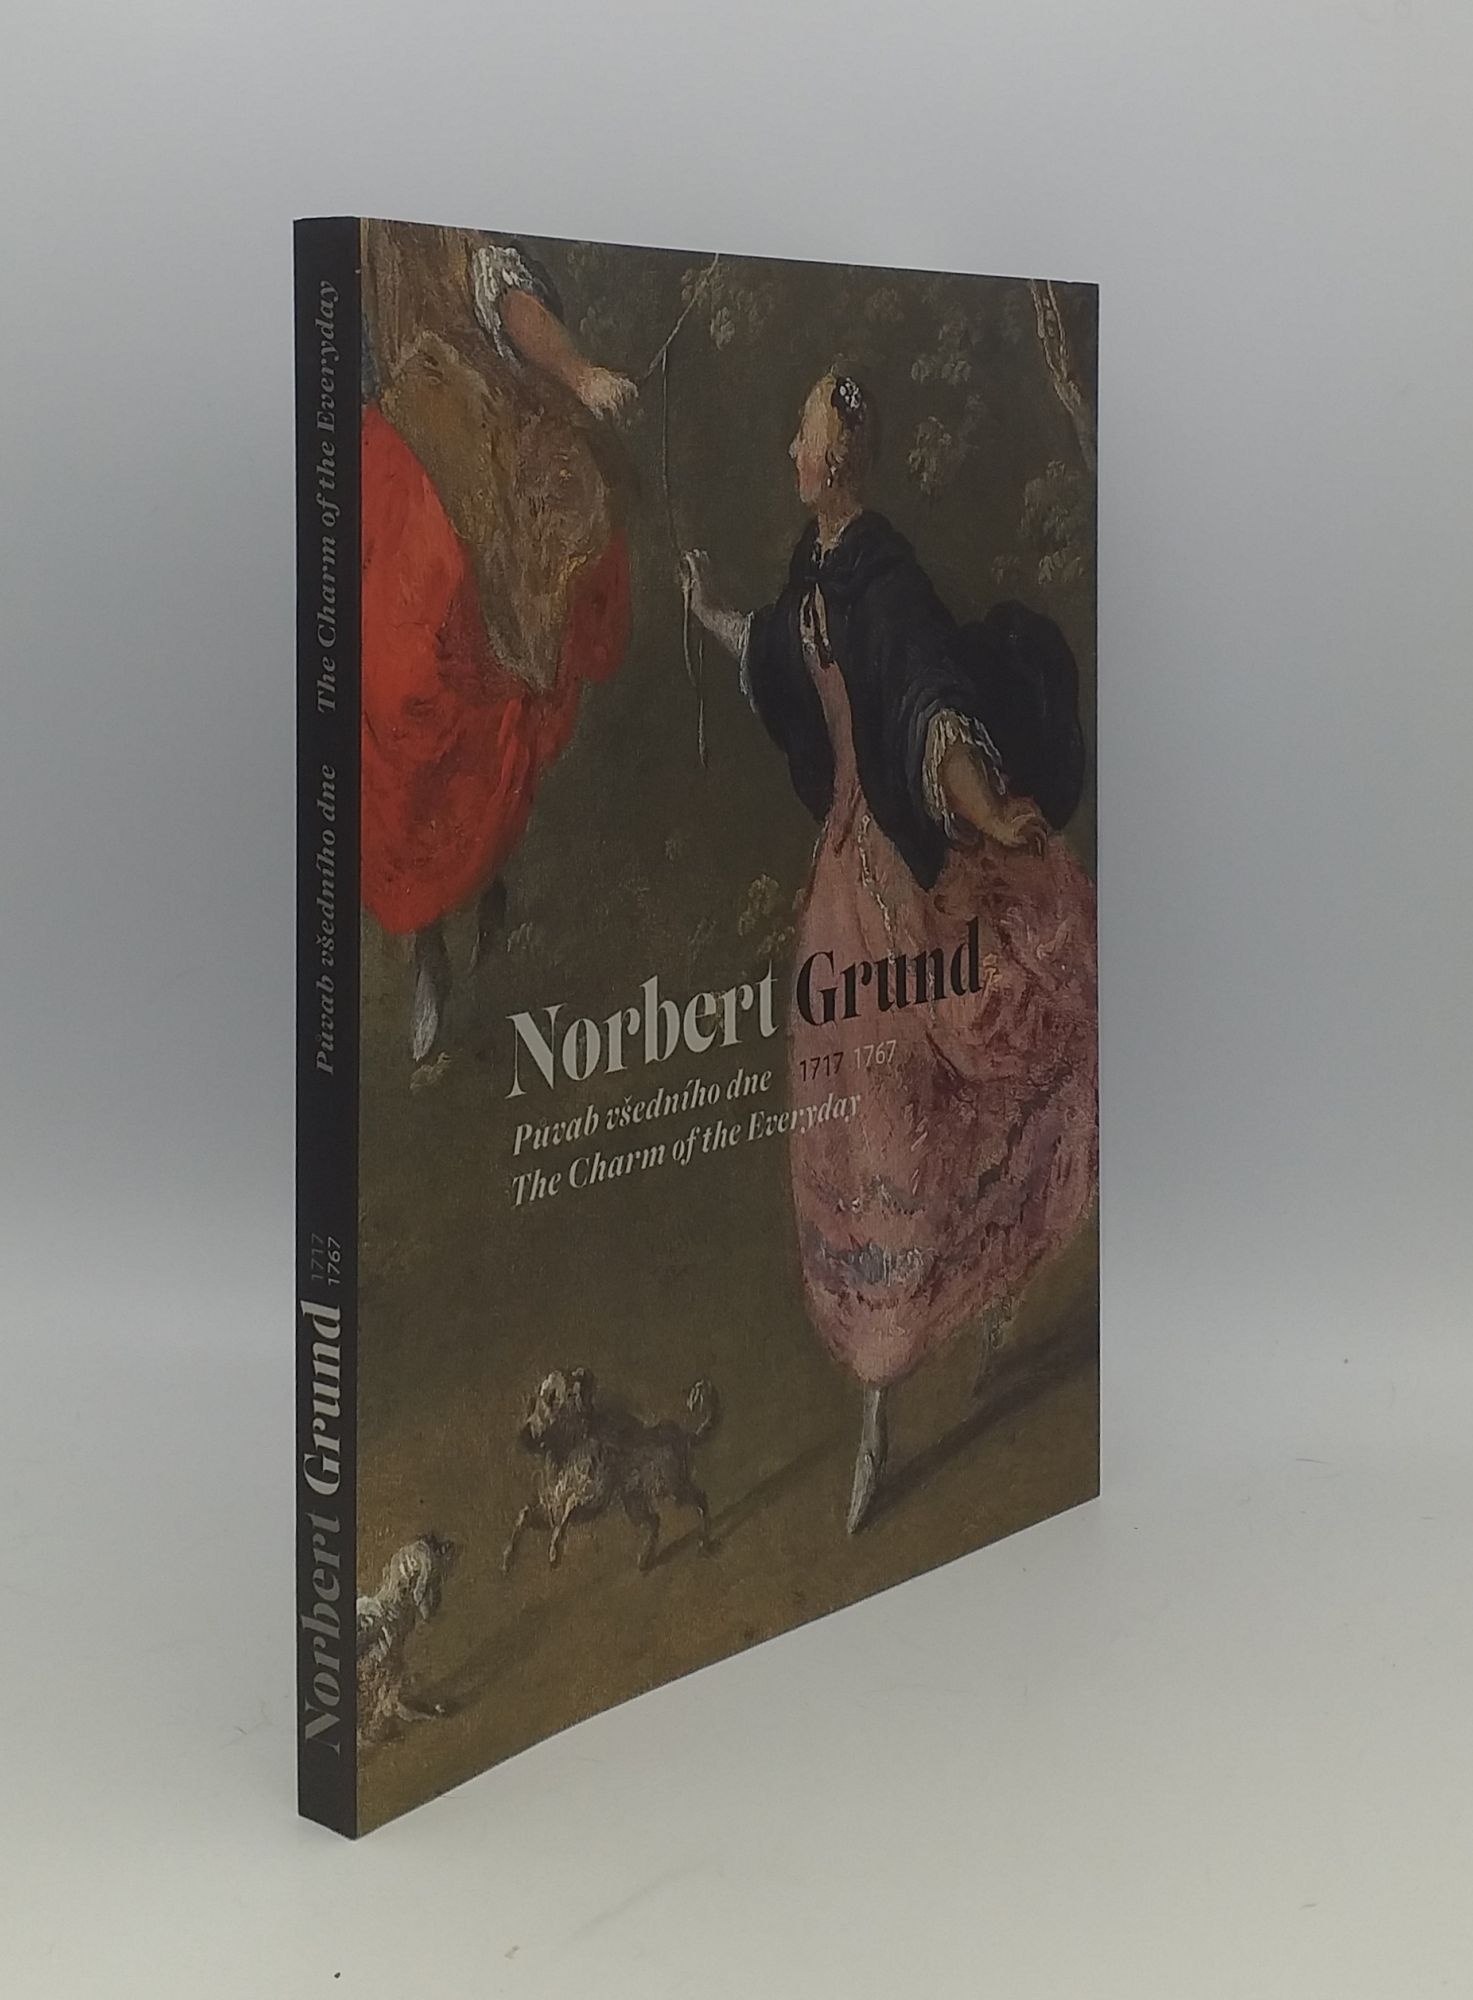 NORBERT GRUND 1717-1767 The Charm of the Everyday